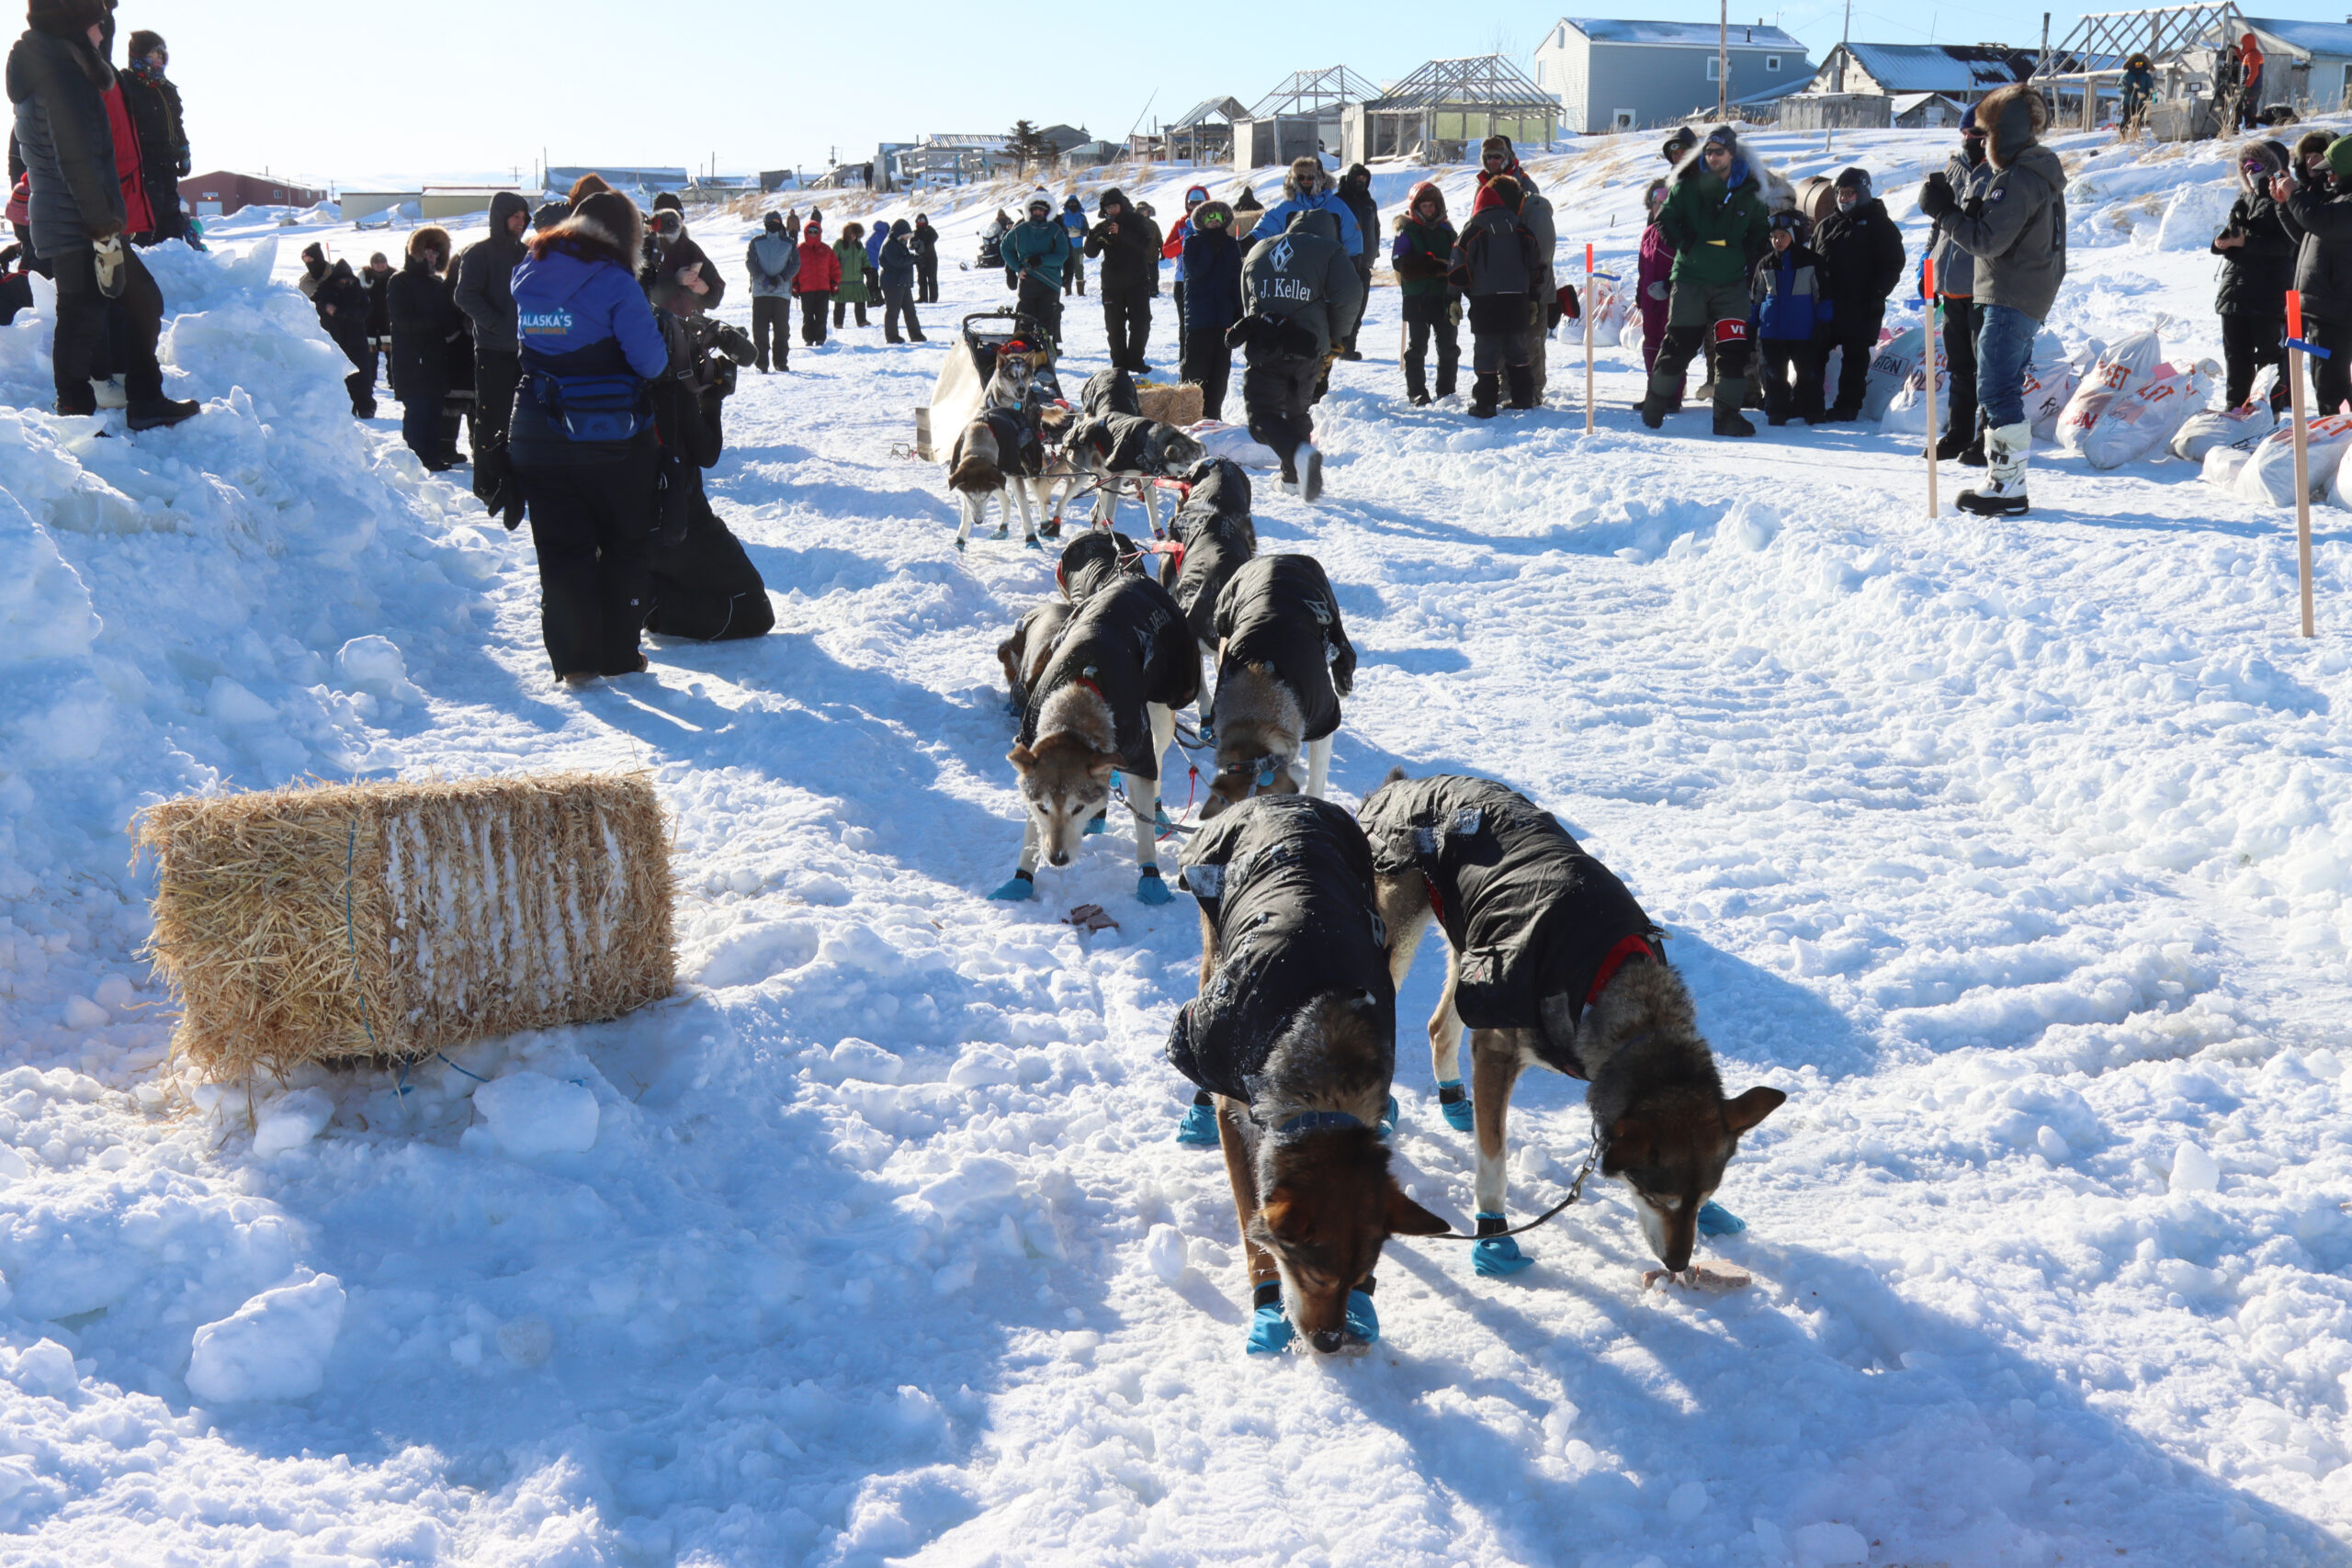 sled dogs eat meat snacks in the snow